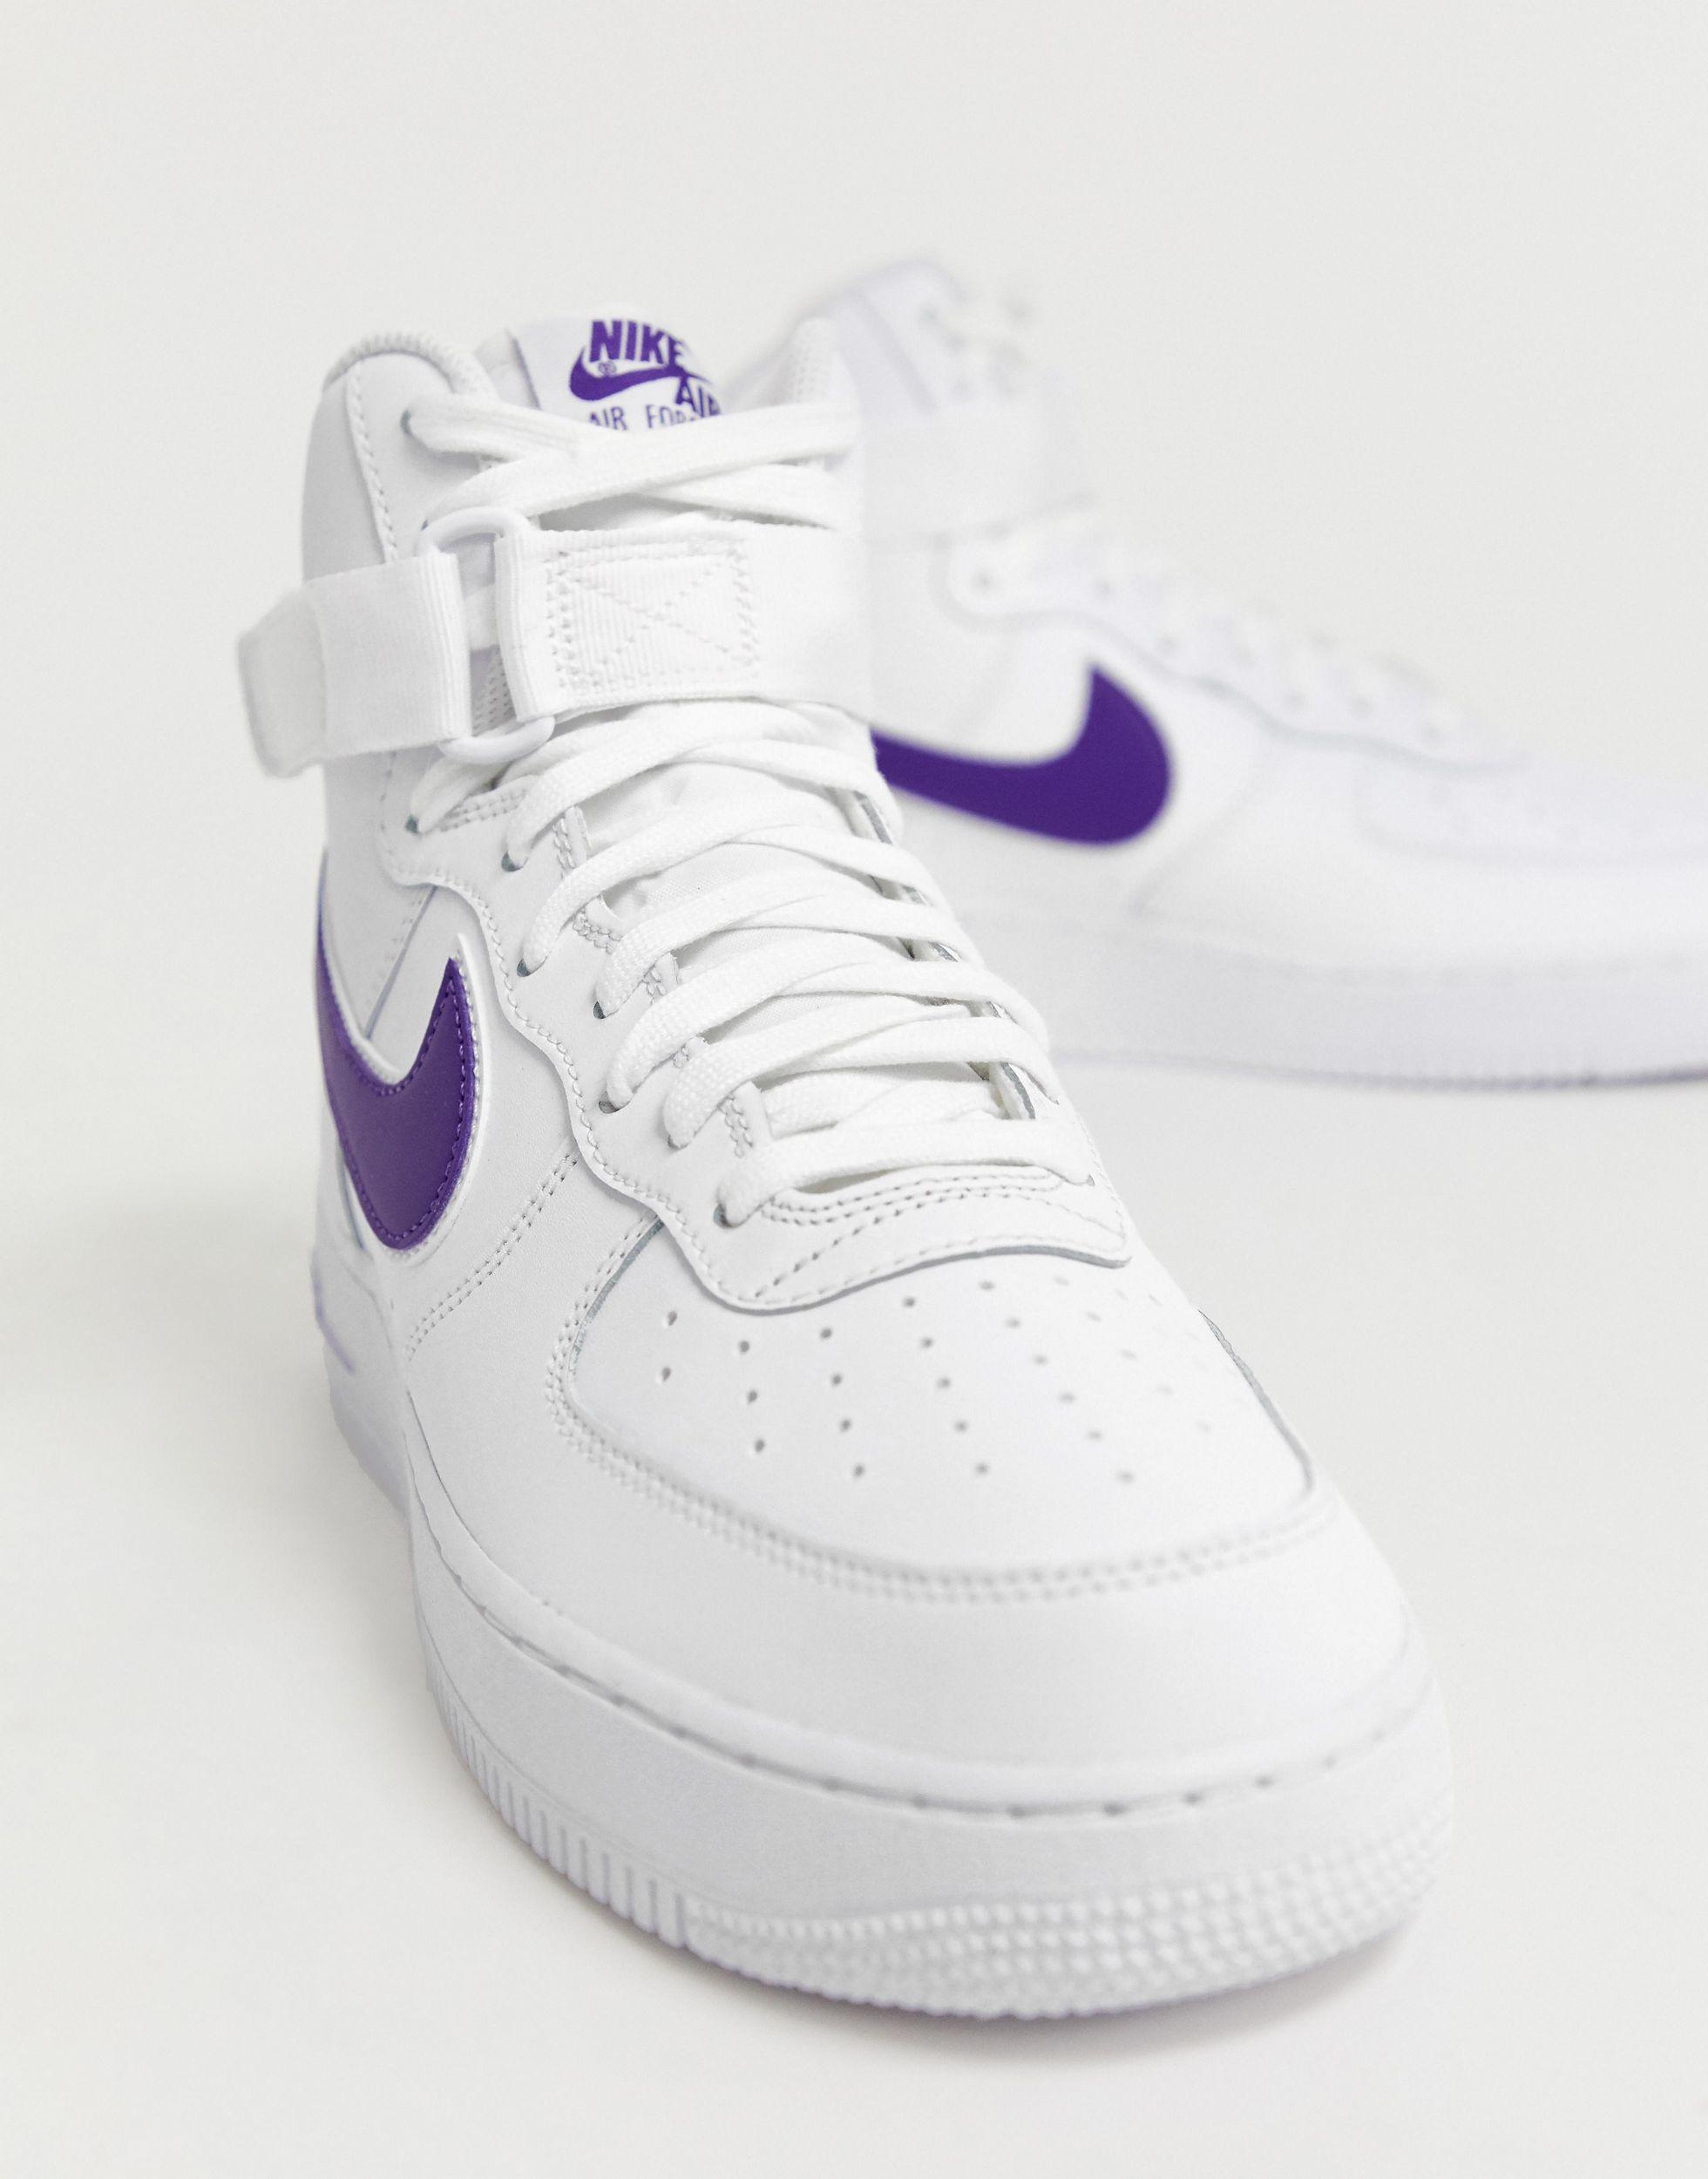 Nike Air Force 1 High 07 3 White Blue, Where To Buy